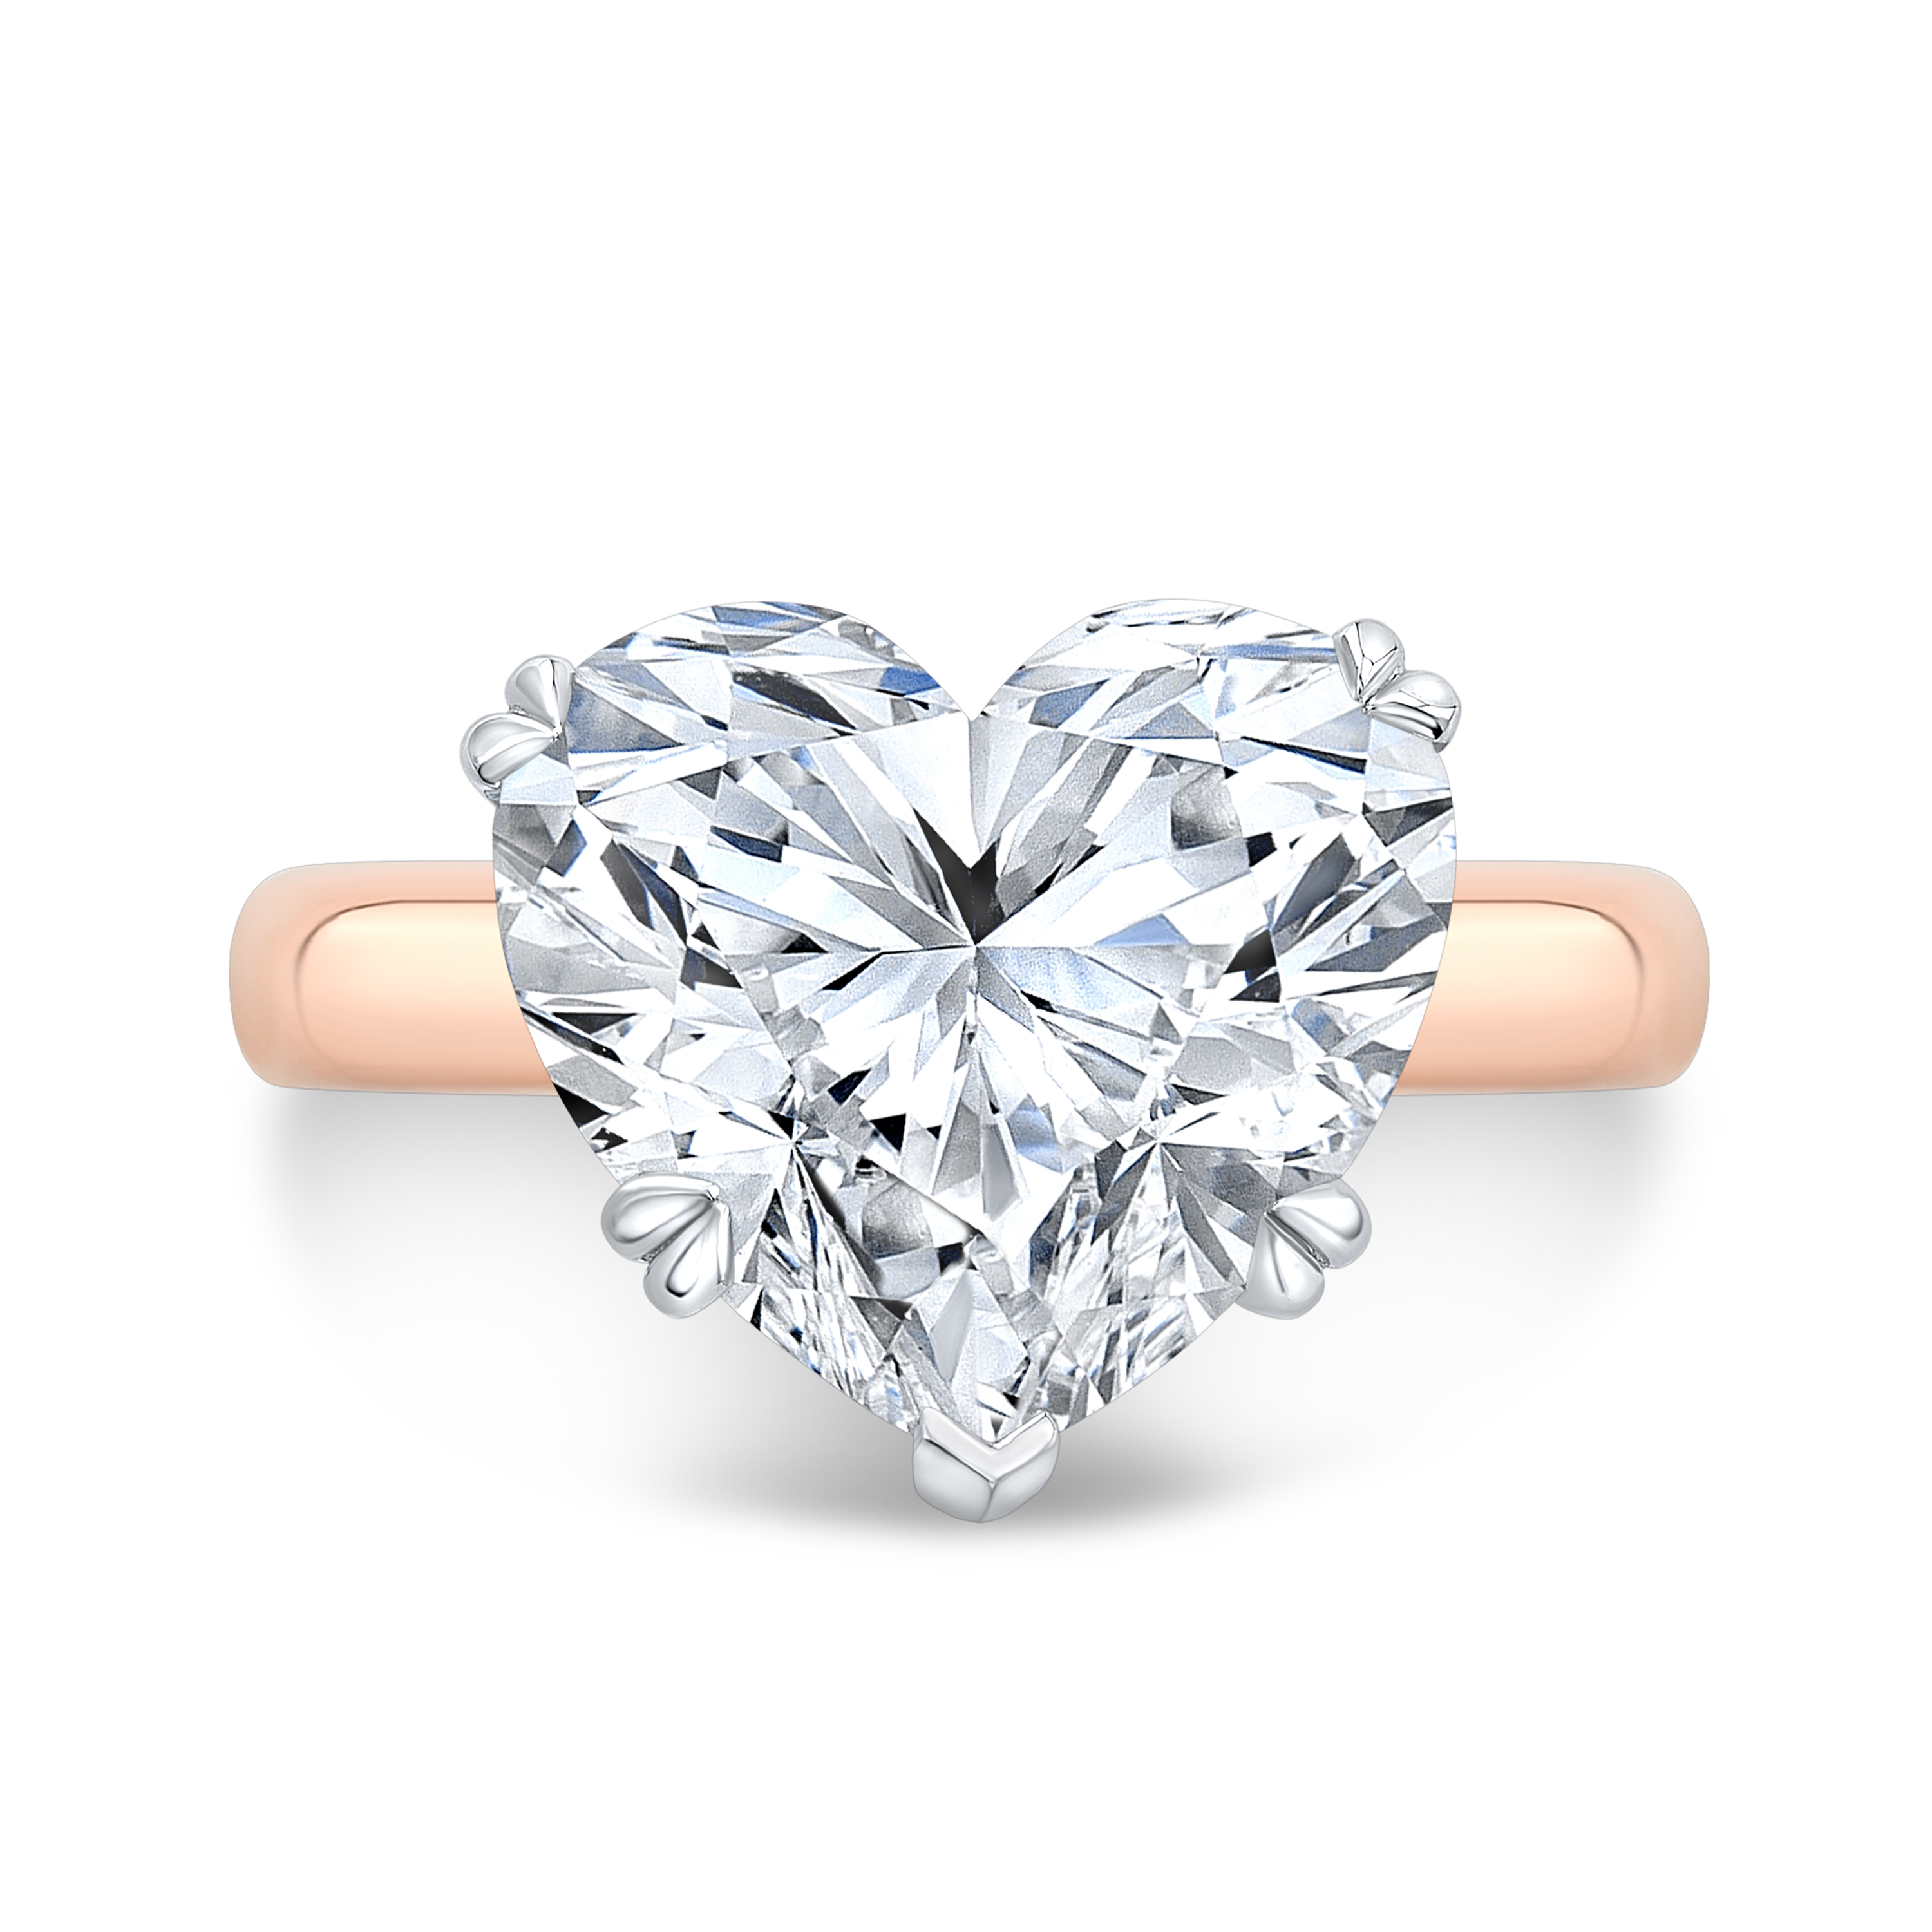 All About Lady Gaga's Heart-Shaped Diamond Engagement Ring | With Clarity